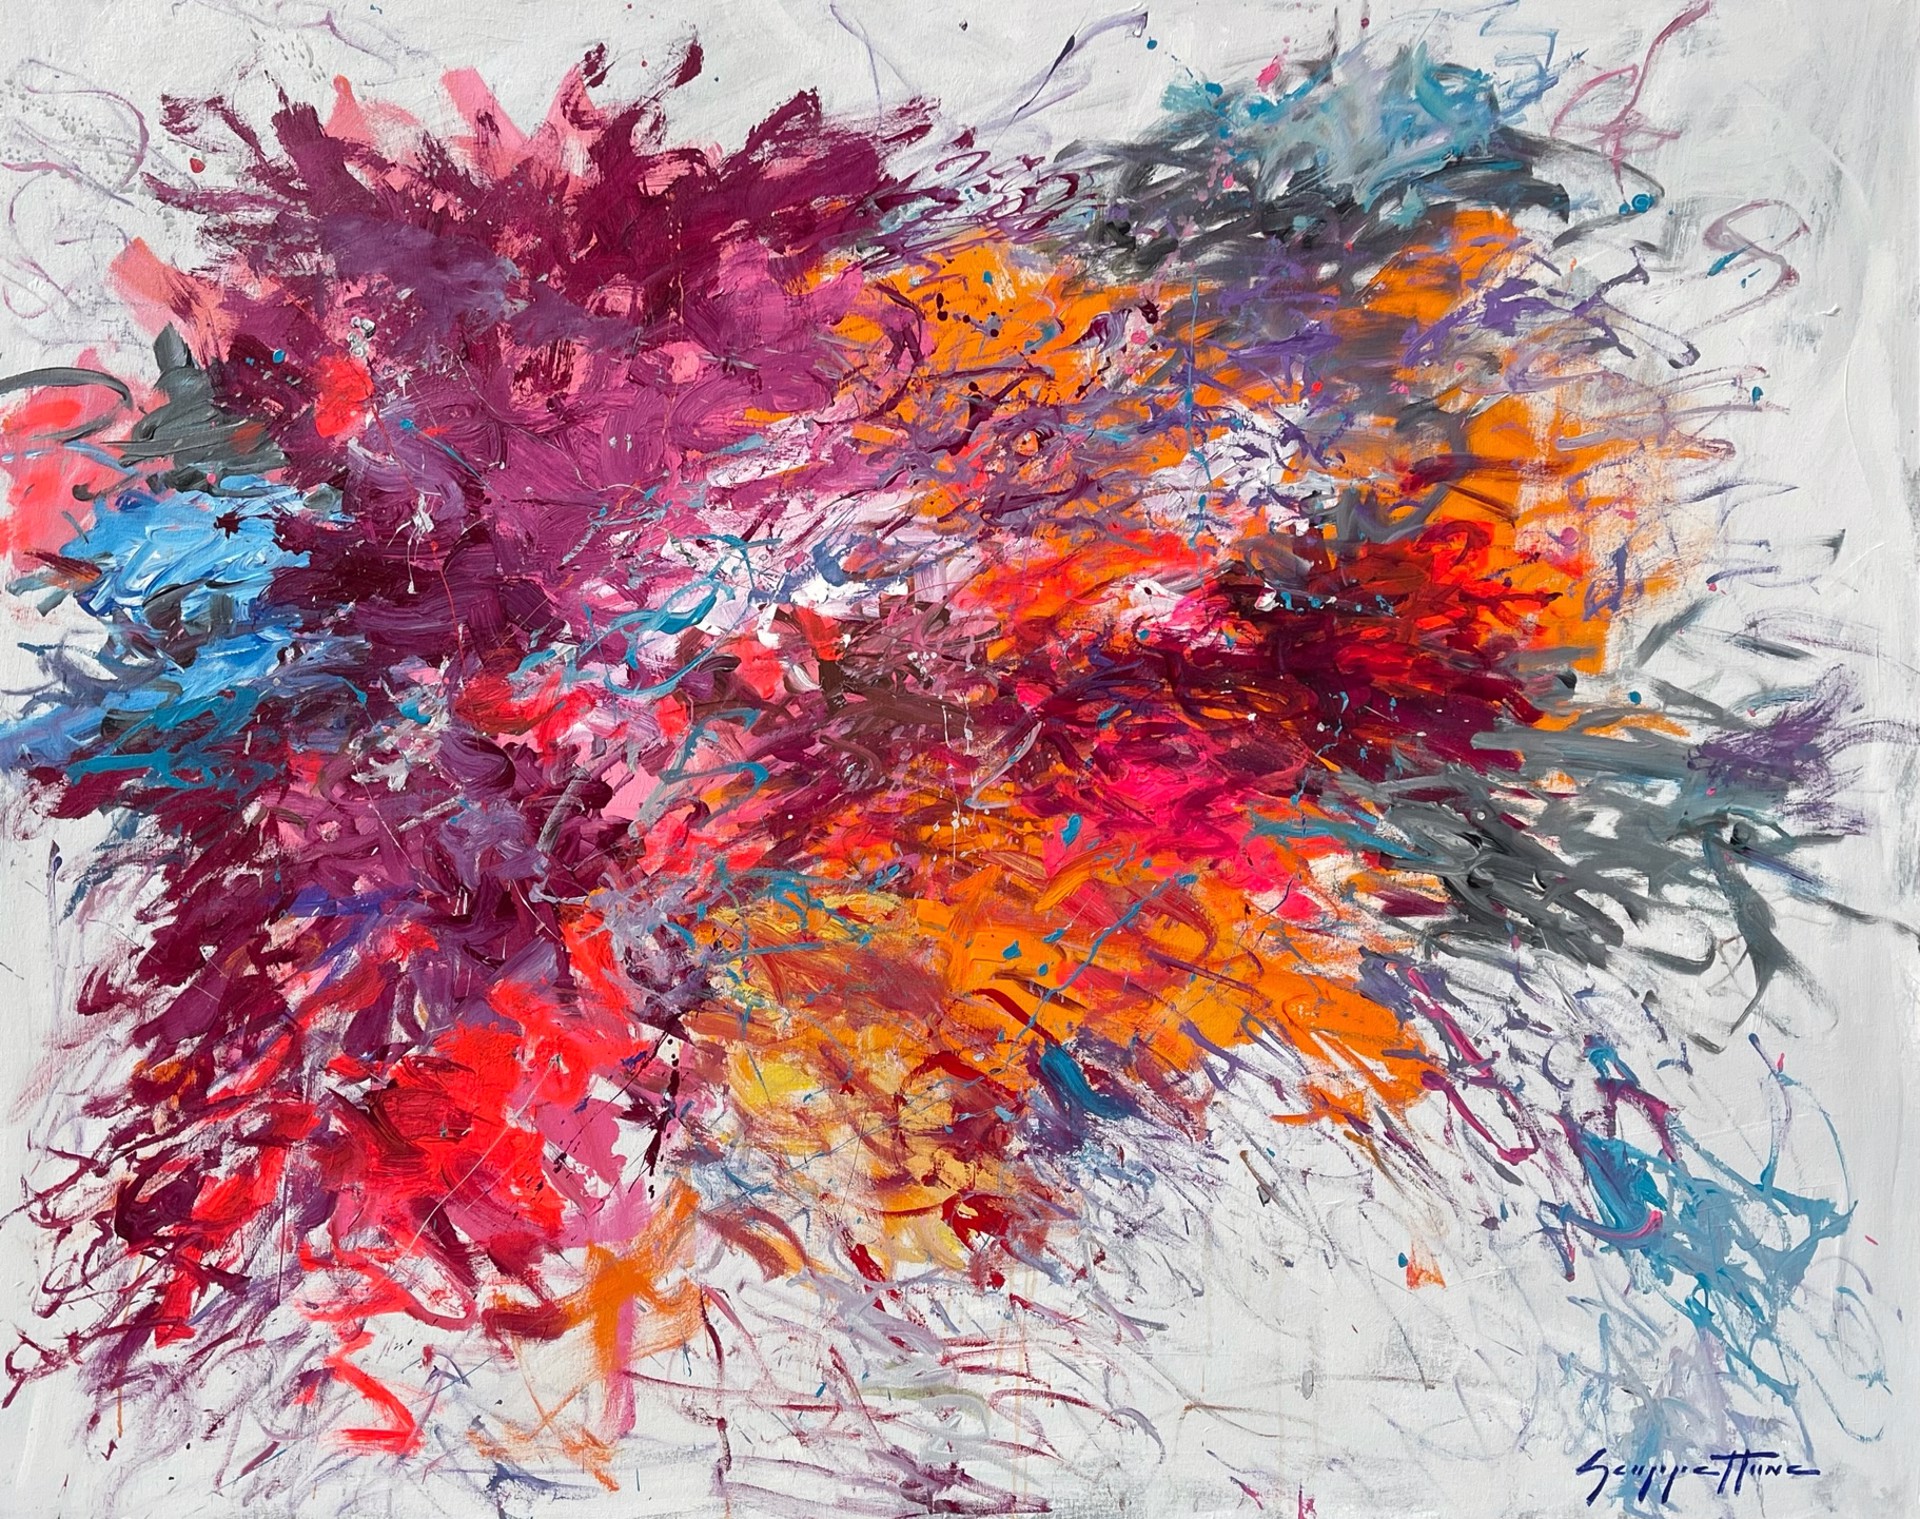 Celebration of Sound, Color by James Scoppettone (Abstracts)